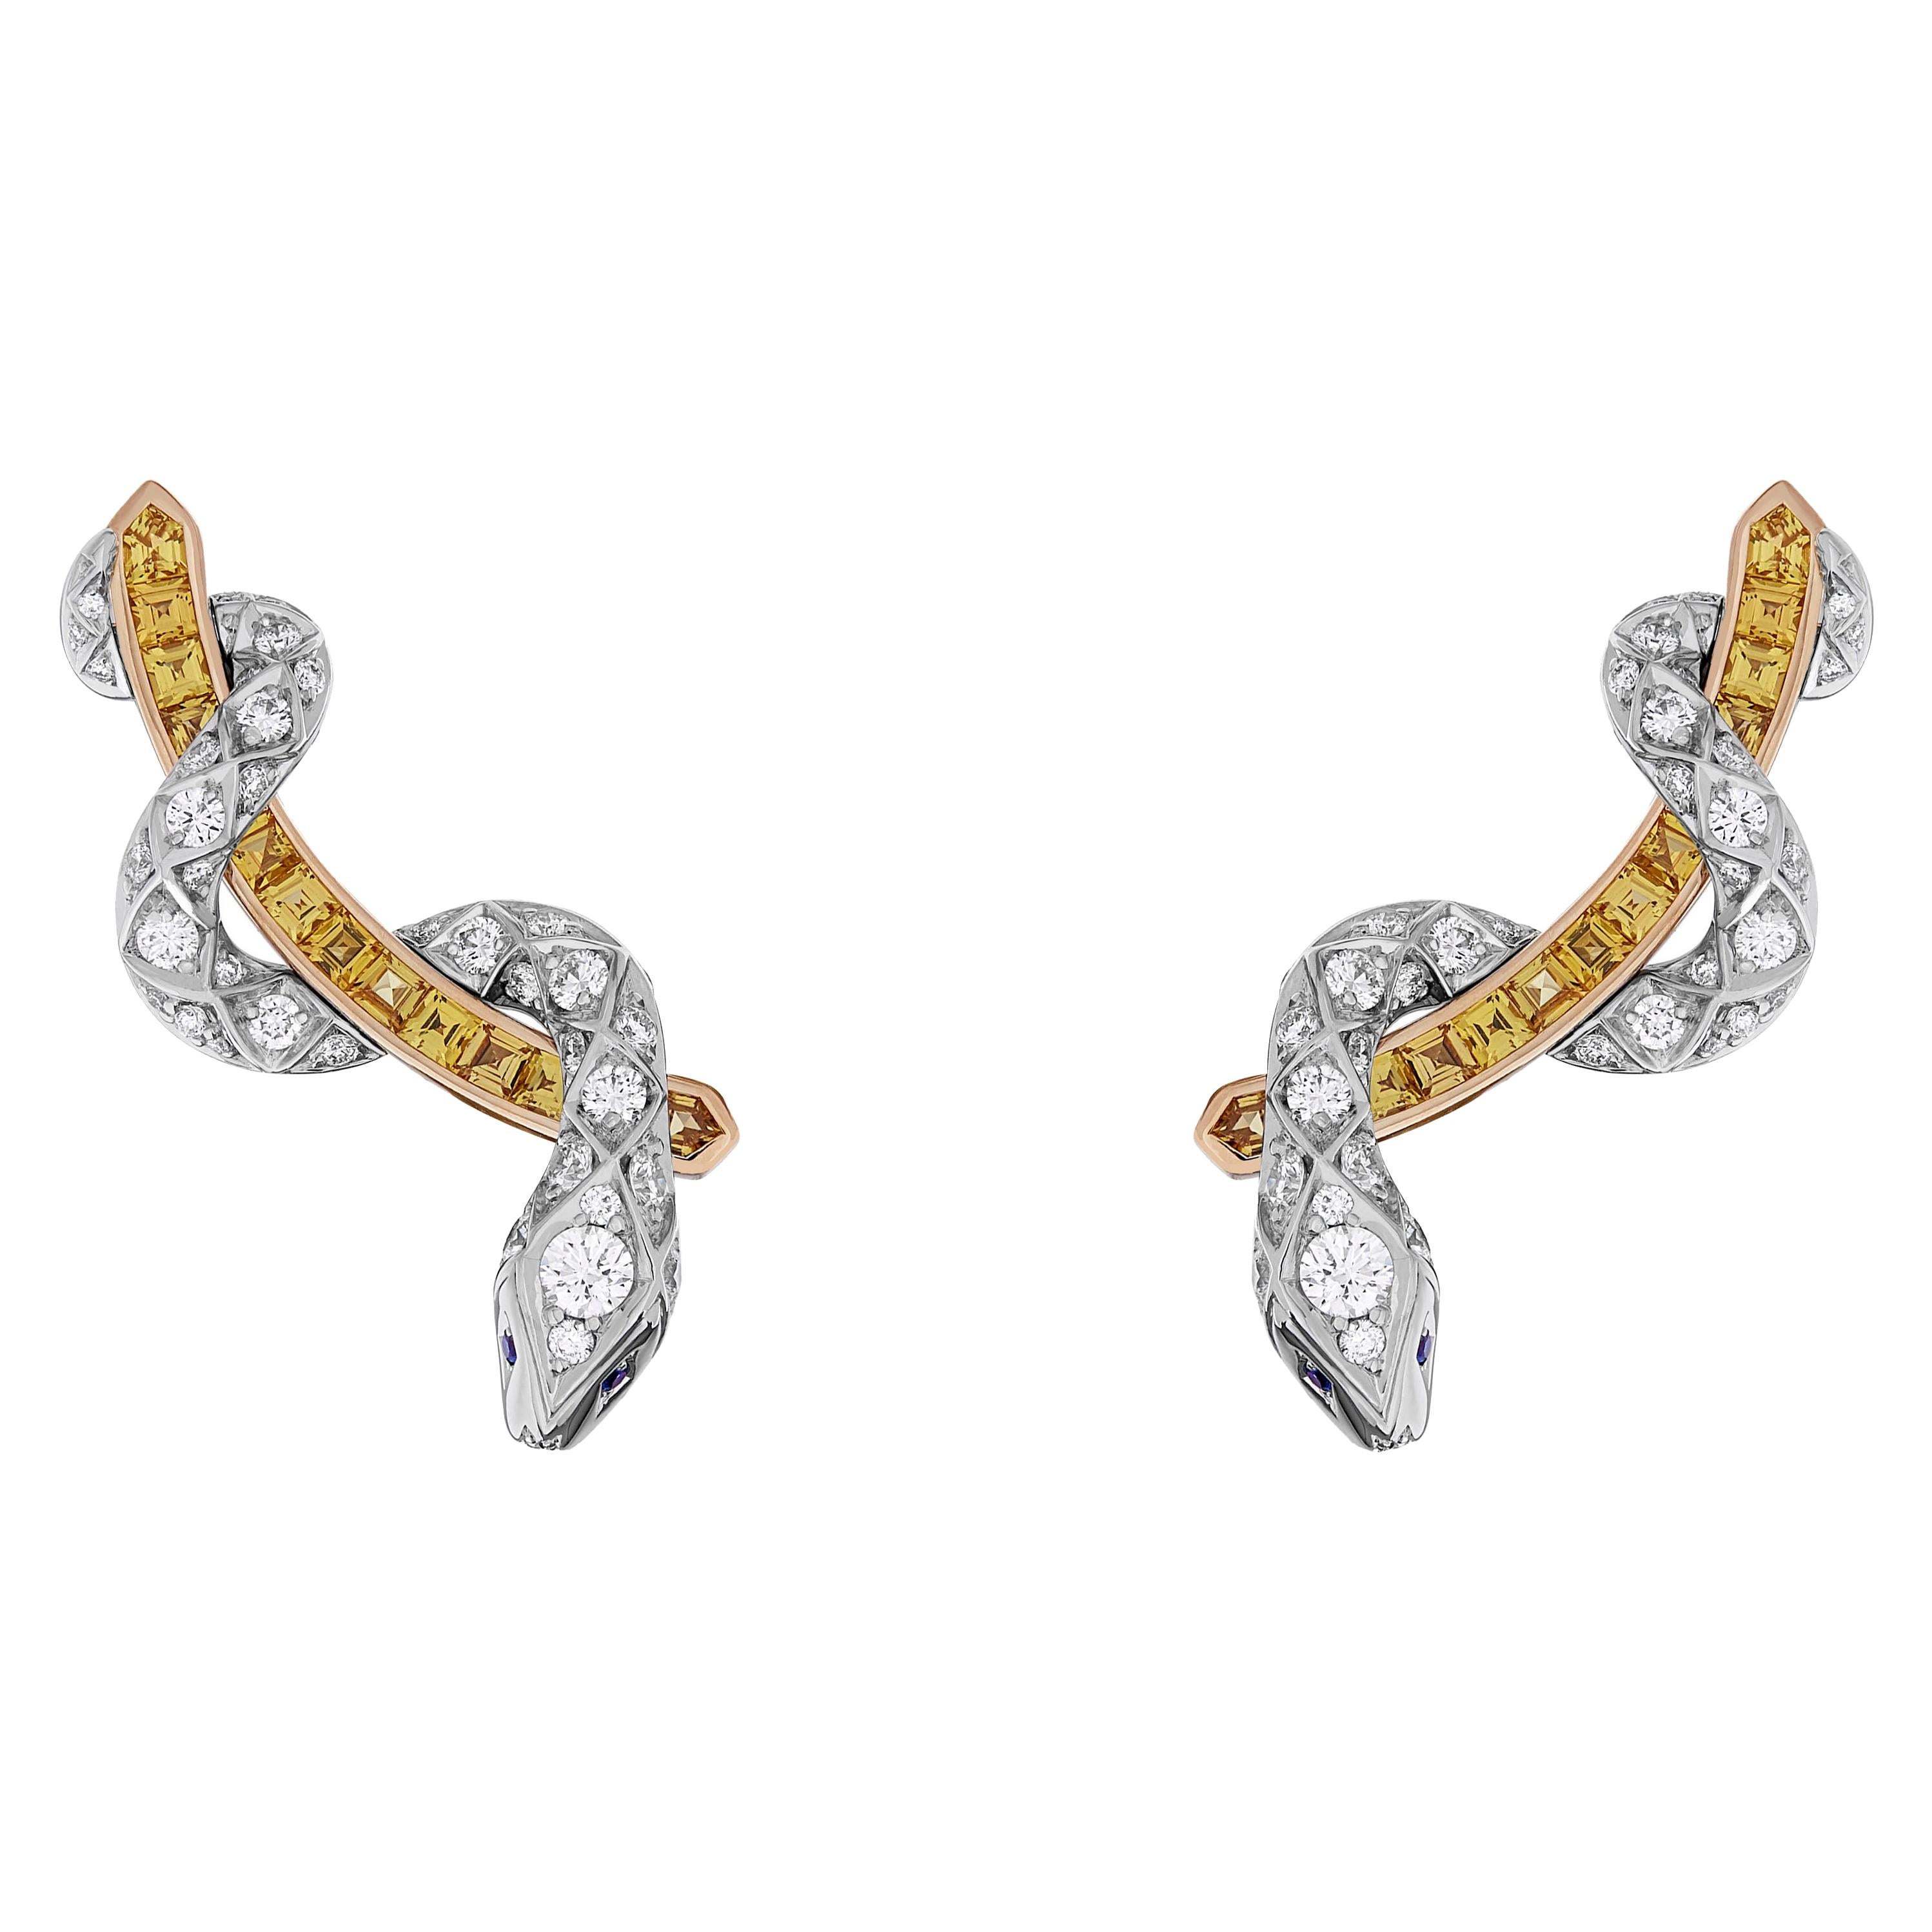 Garrard 'Signature Serpent' White Diamond and Yellow Sapphire Ear Climbers For Sale